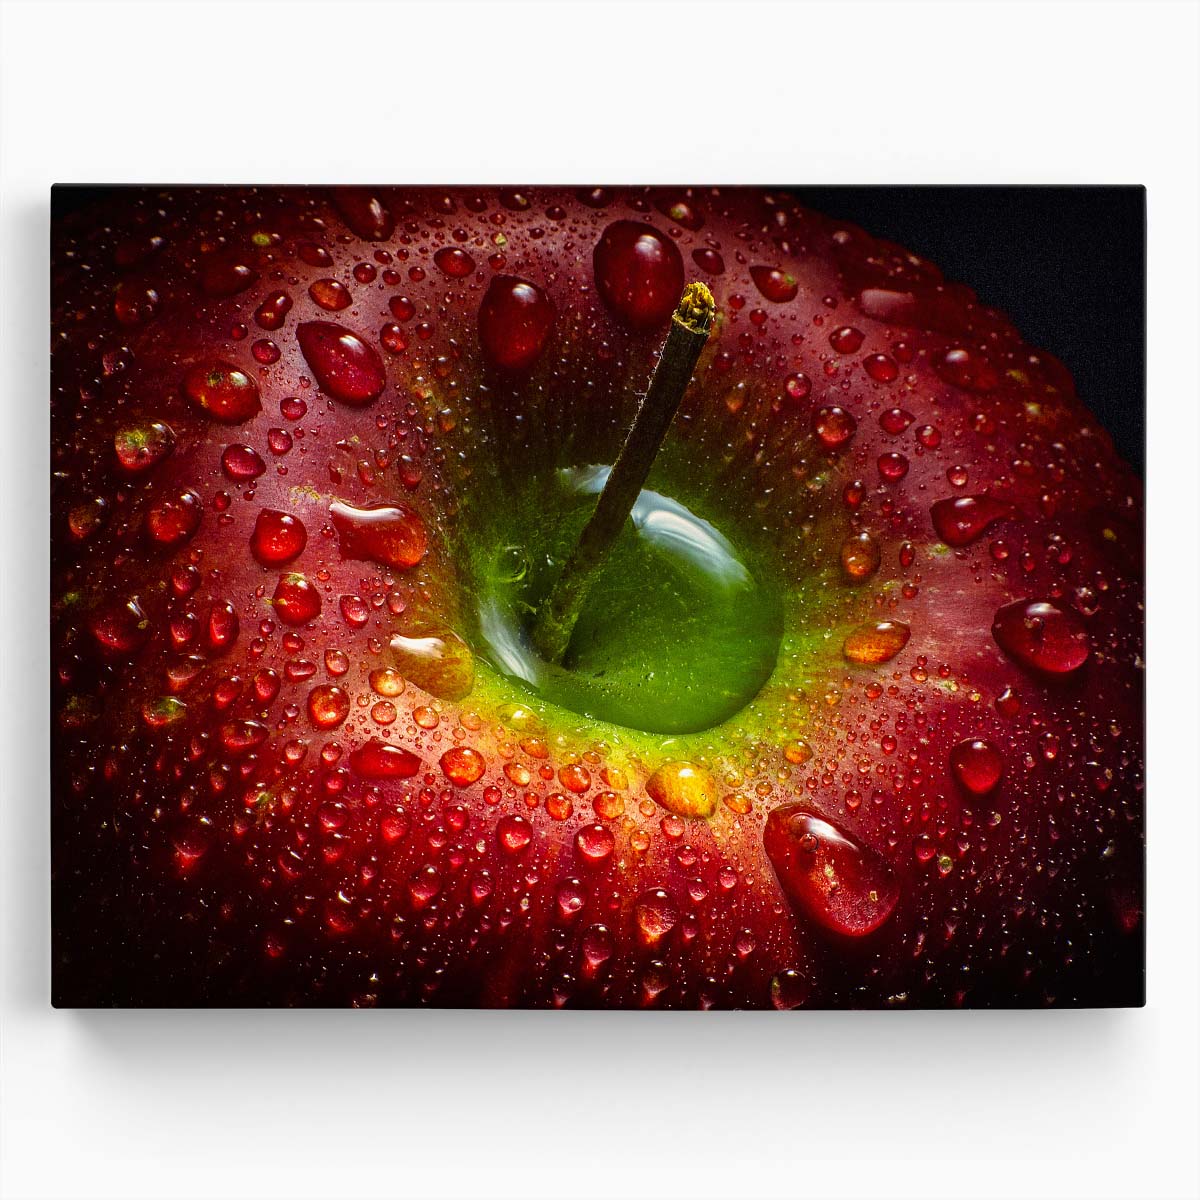 Colorful Macro Red Apple Droplets Abstract Wall Art by Luxuriance Designs. Made in USA.